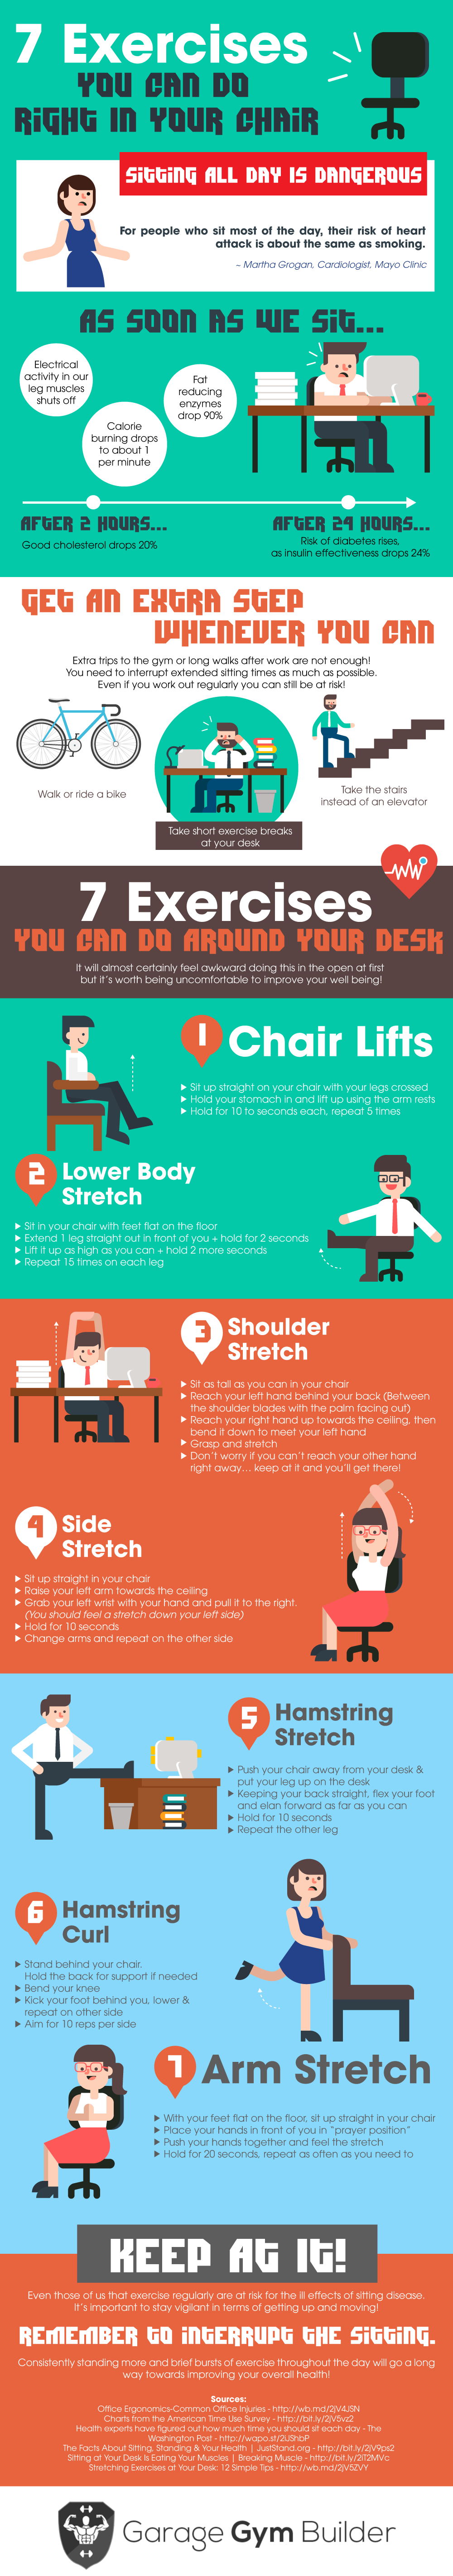 7 Exercises You can do in Your Chair